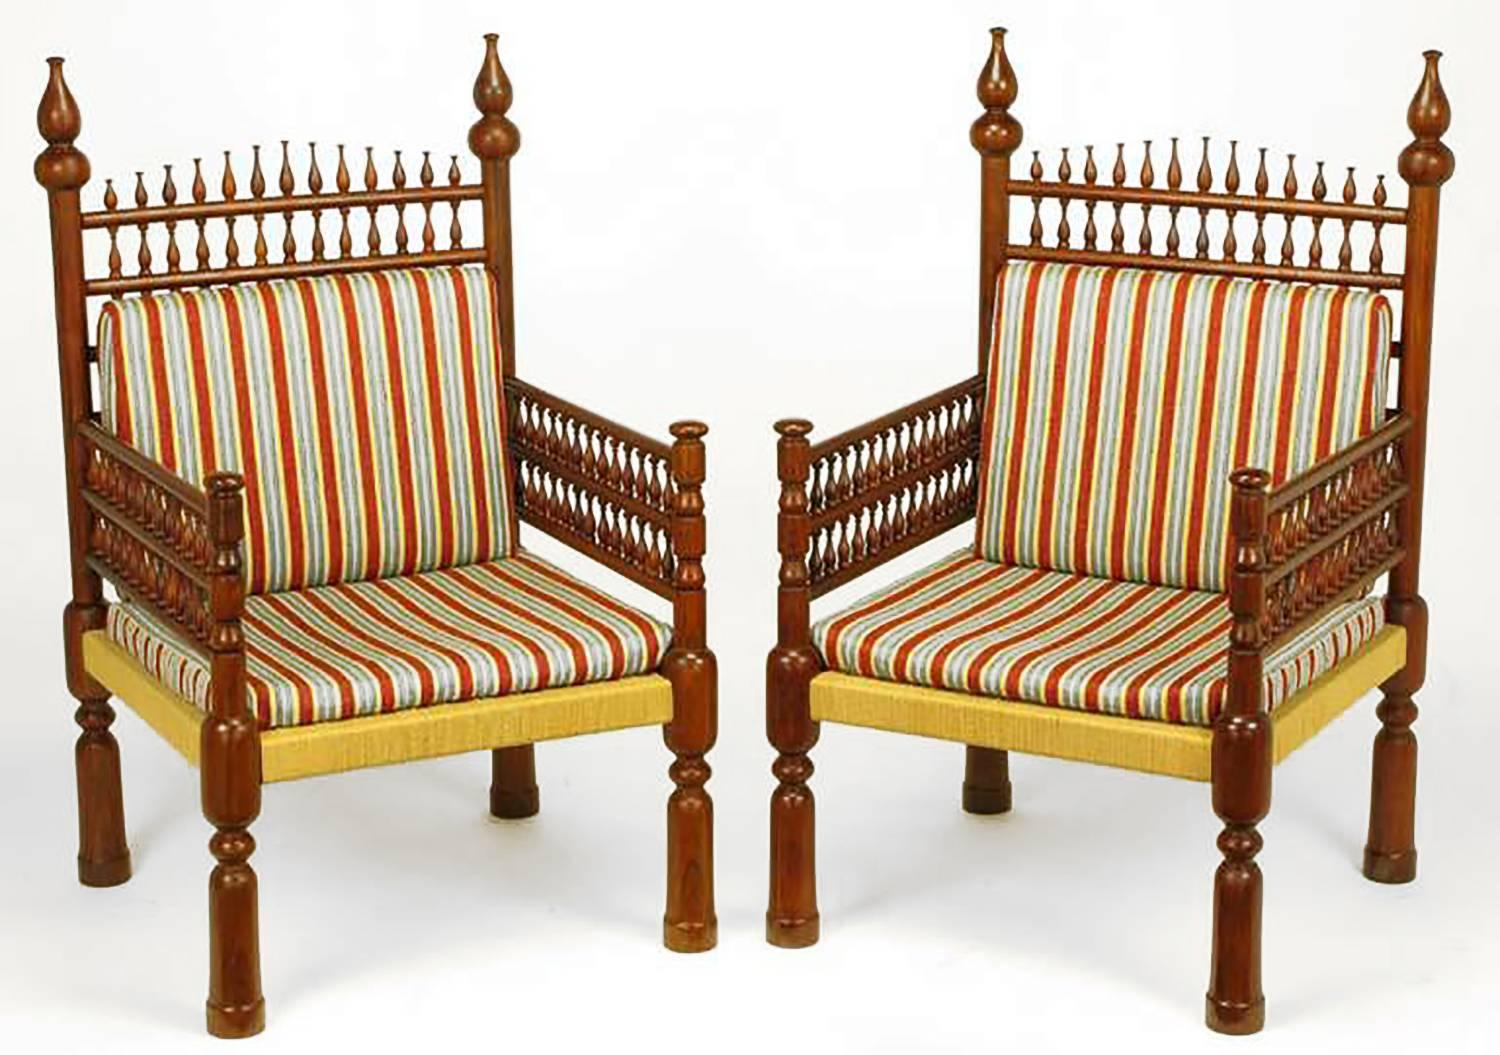 Beautiful carved teakwood and woven patterned rush seat arm or throne chairs with Moroccan styling. Also available with seat and back cushions.